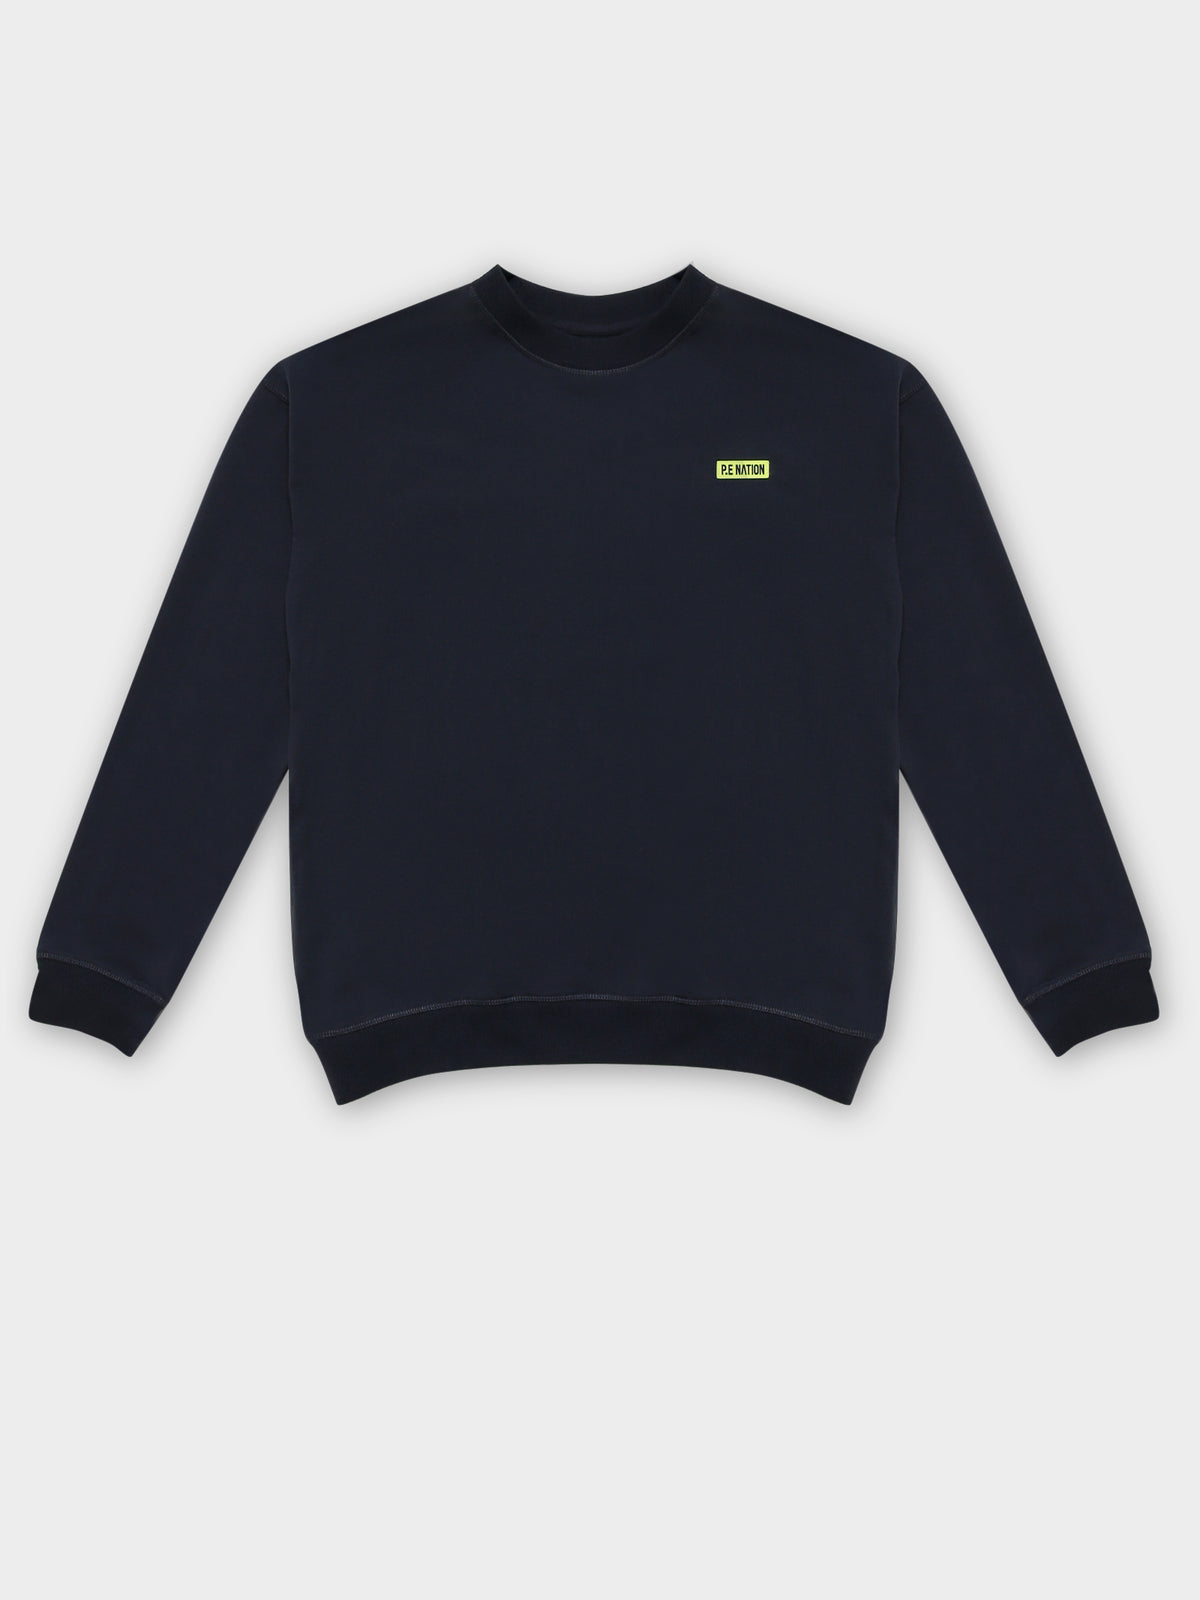 Playout Sweater in Navy